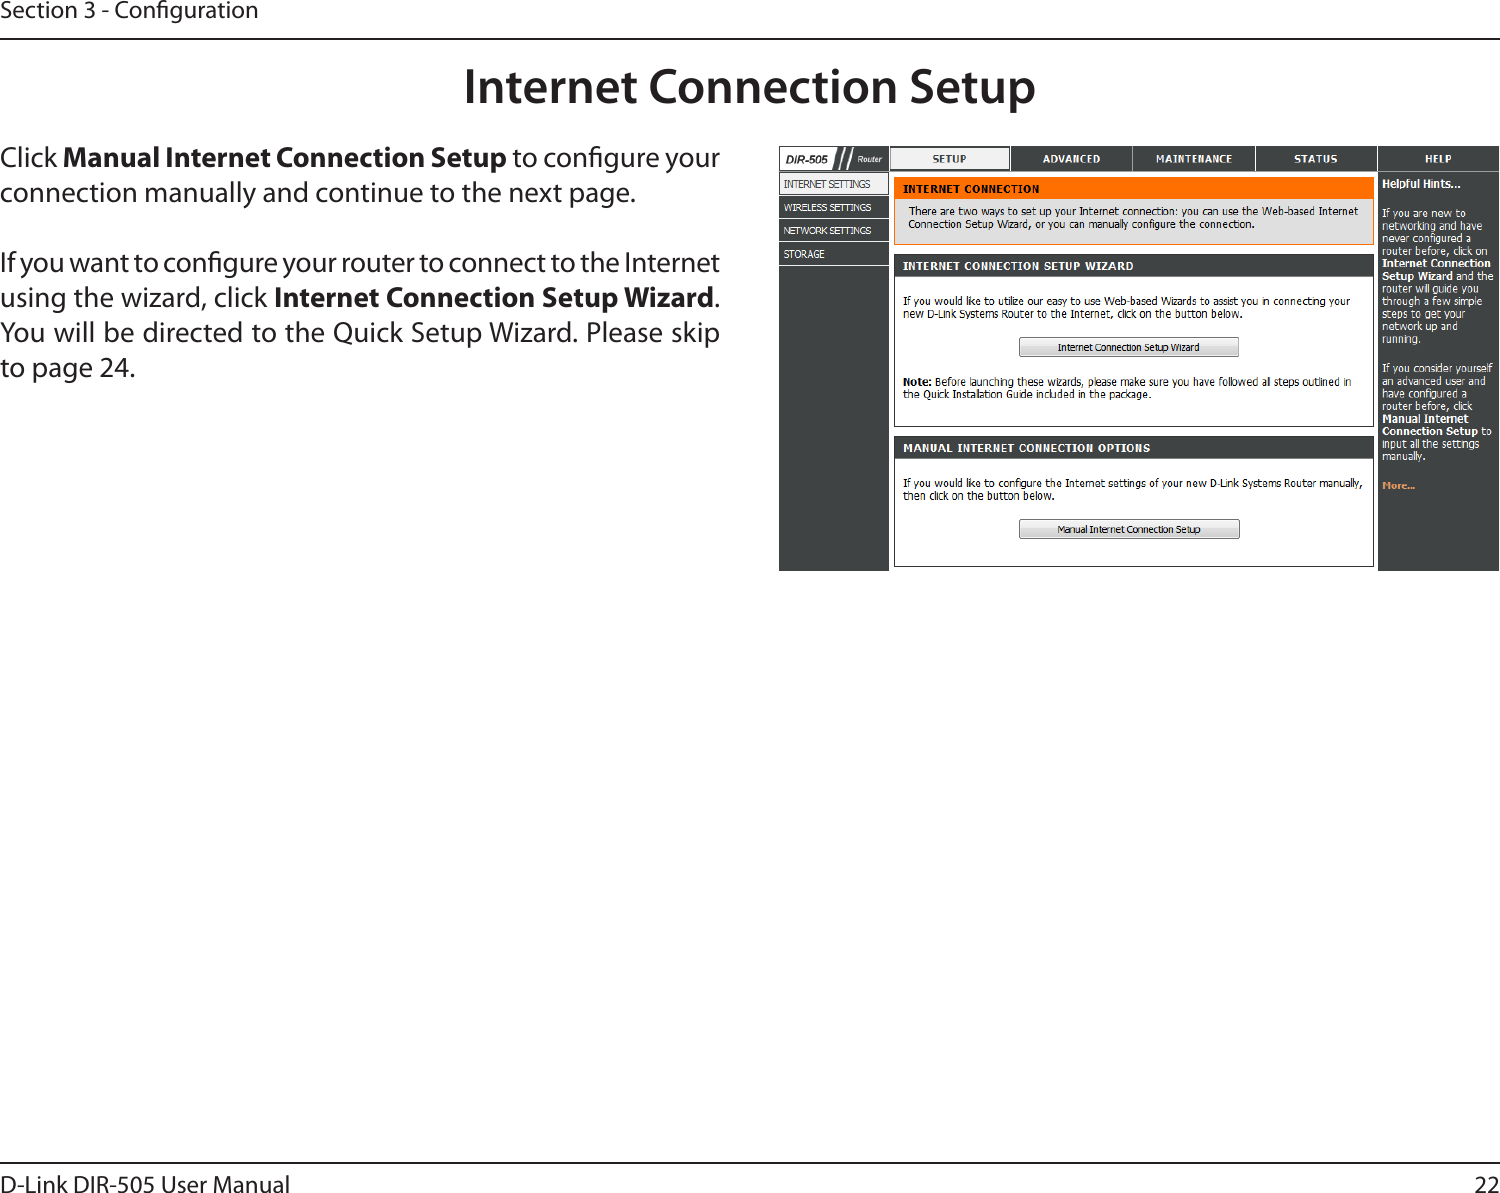 22D-Link DIR-505 User ManualSection 3 - CongurationInternet Connection SetupClick Manual Internet Connection Setup to congure your connection manually and continue to the next page.If you want to congure your router to connect to the Internet using the wizard, click Internet Connection Setup Wizard. You will be directed to the Quick Setup Wizard. Please skip to page 24.